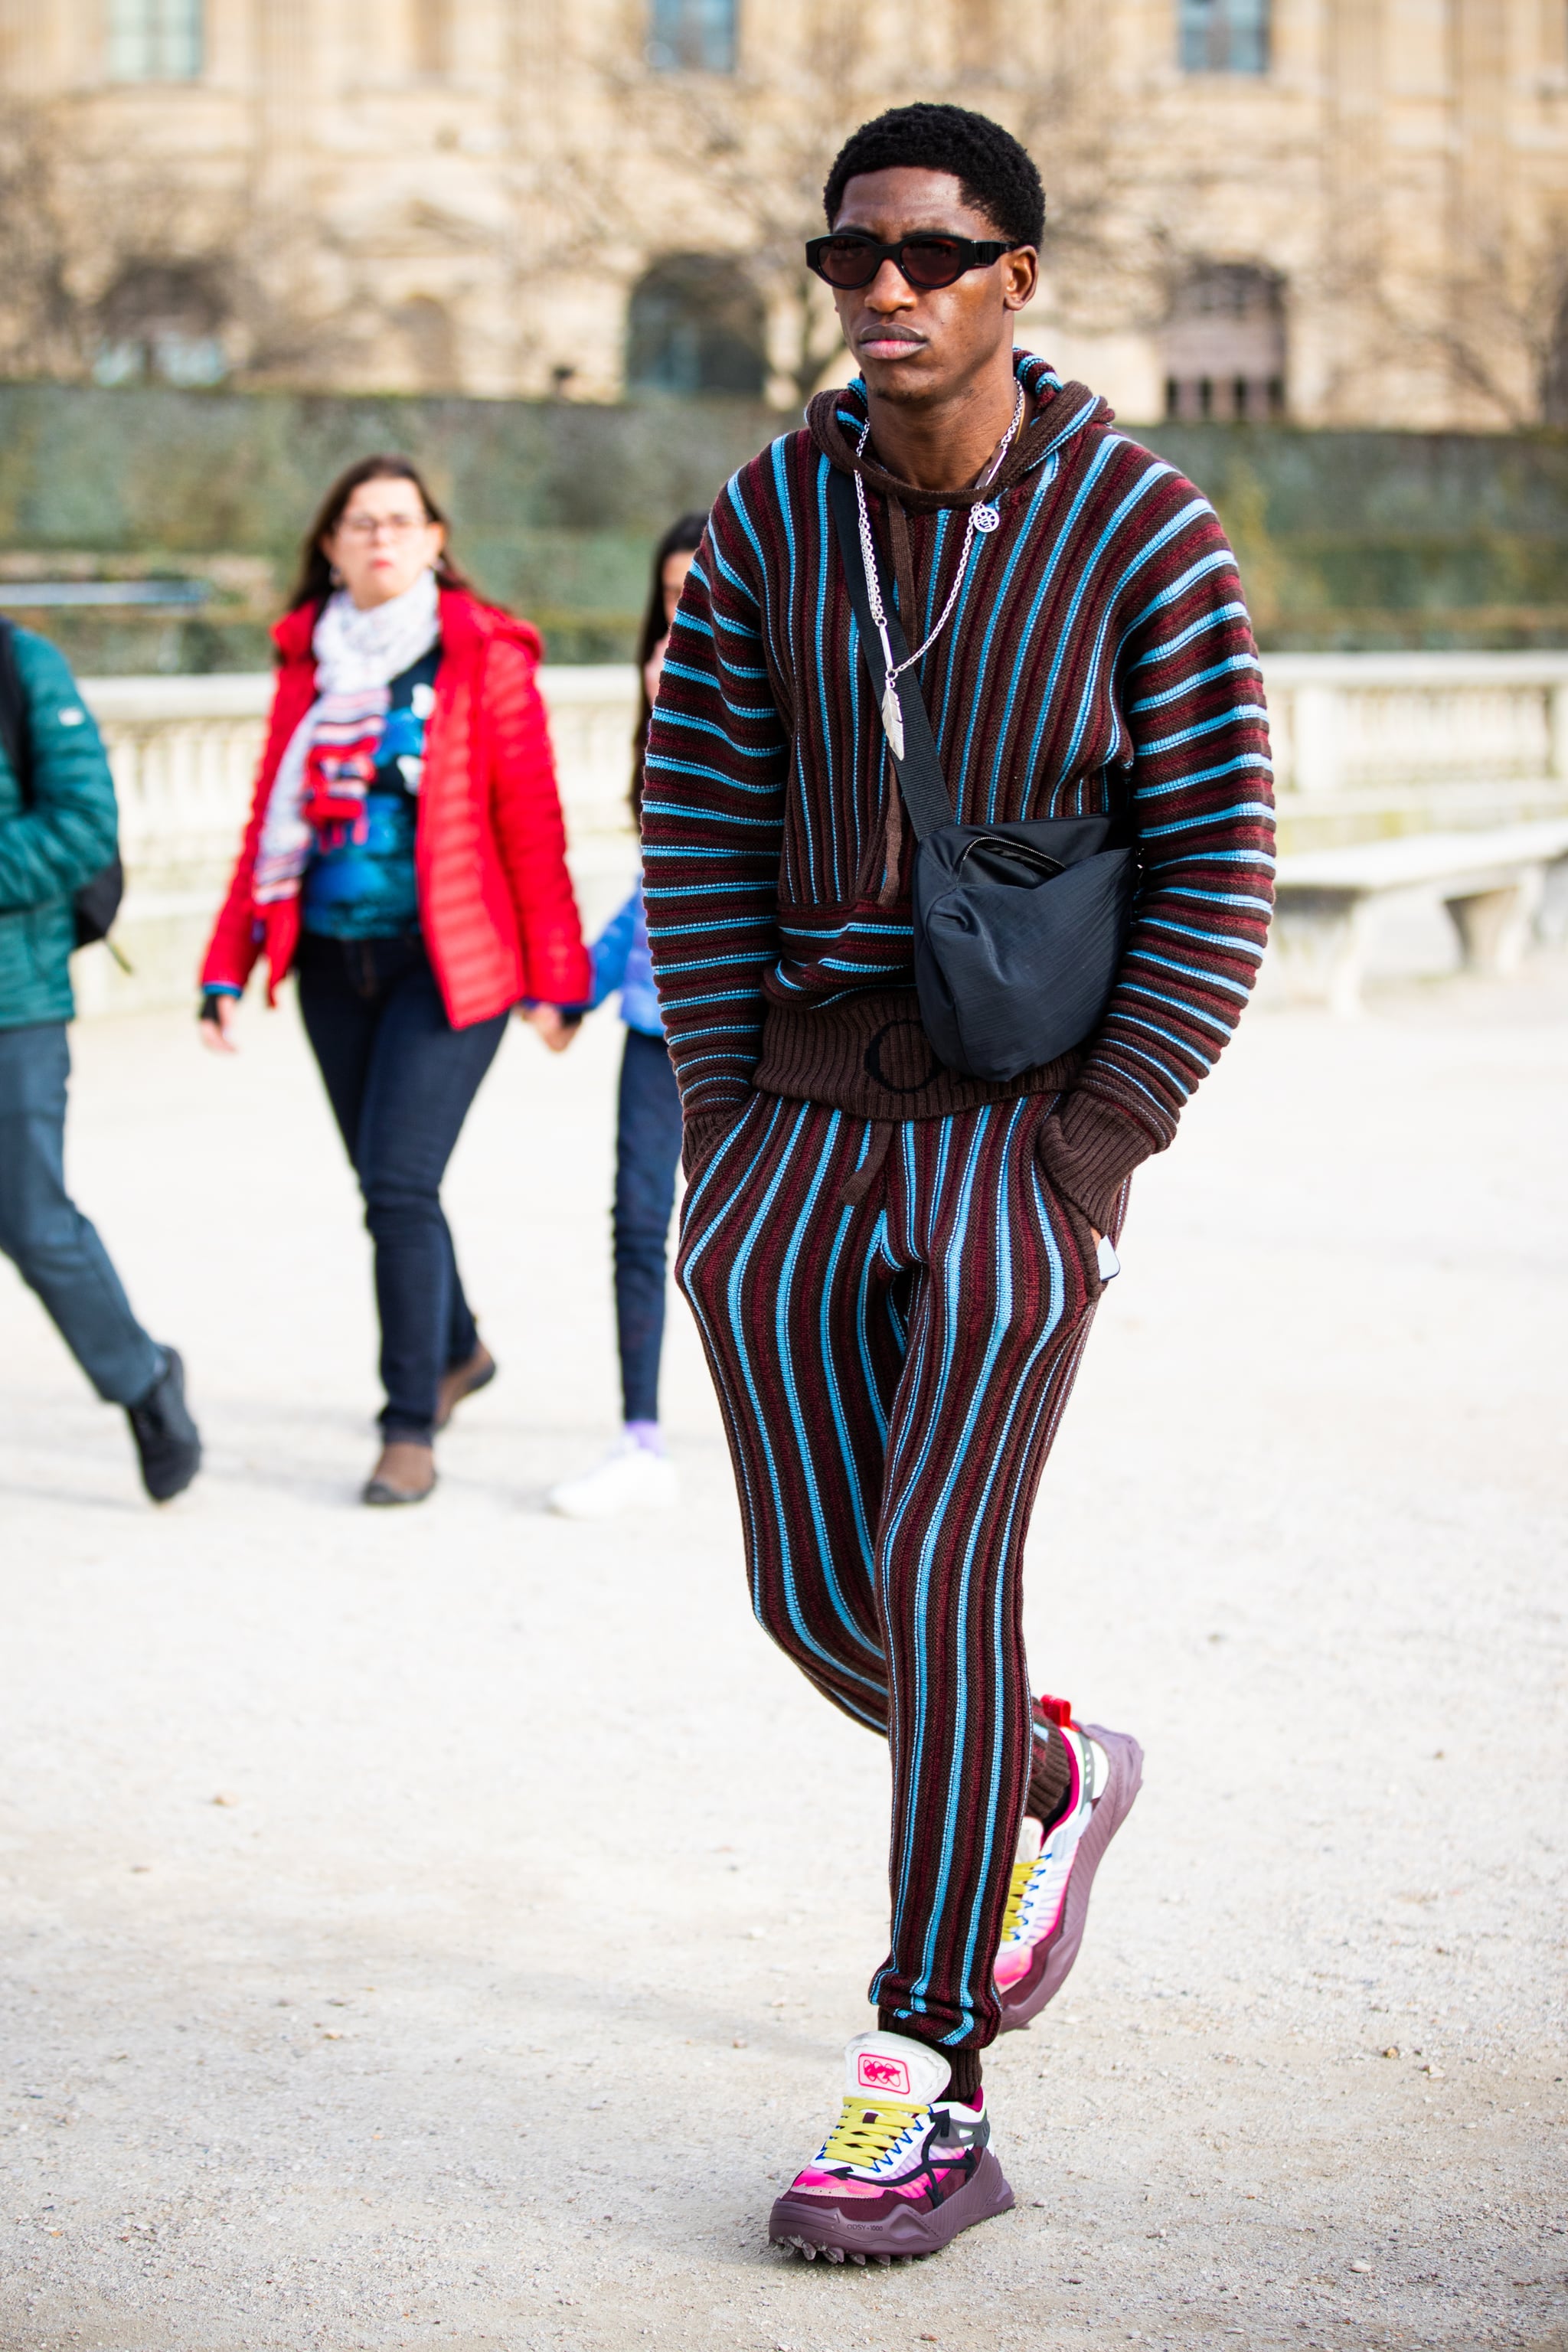 The Top Collections of Paris Fashion Week Fall 2020